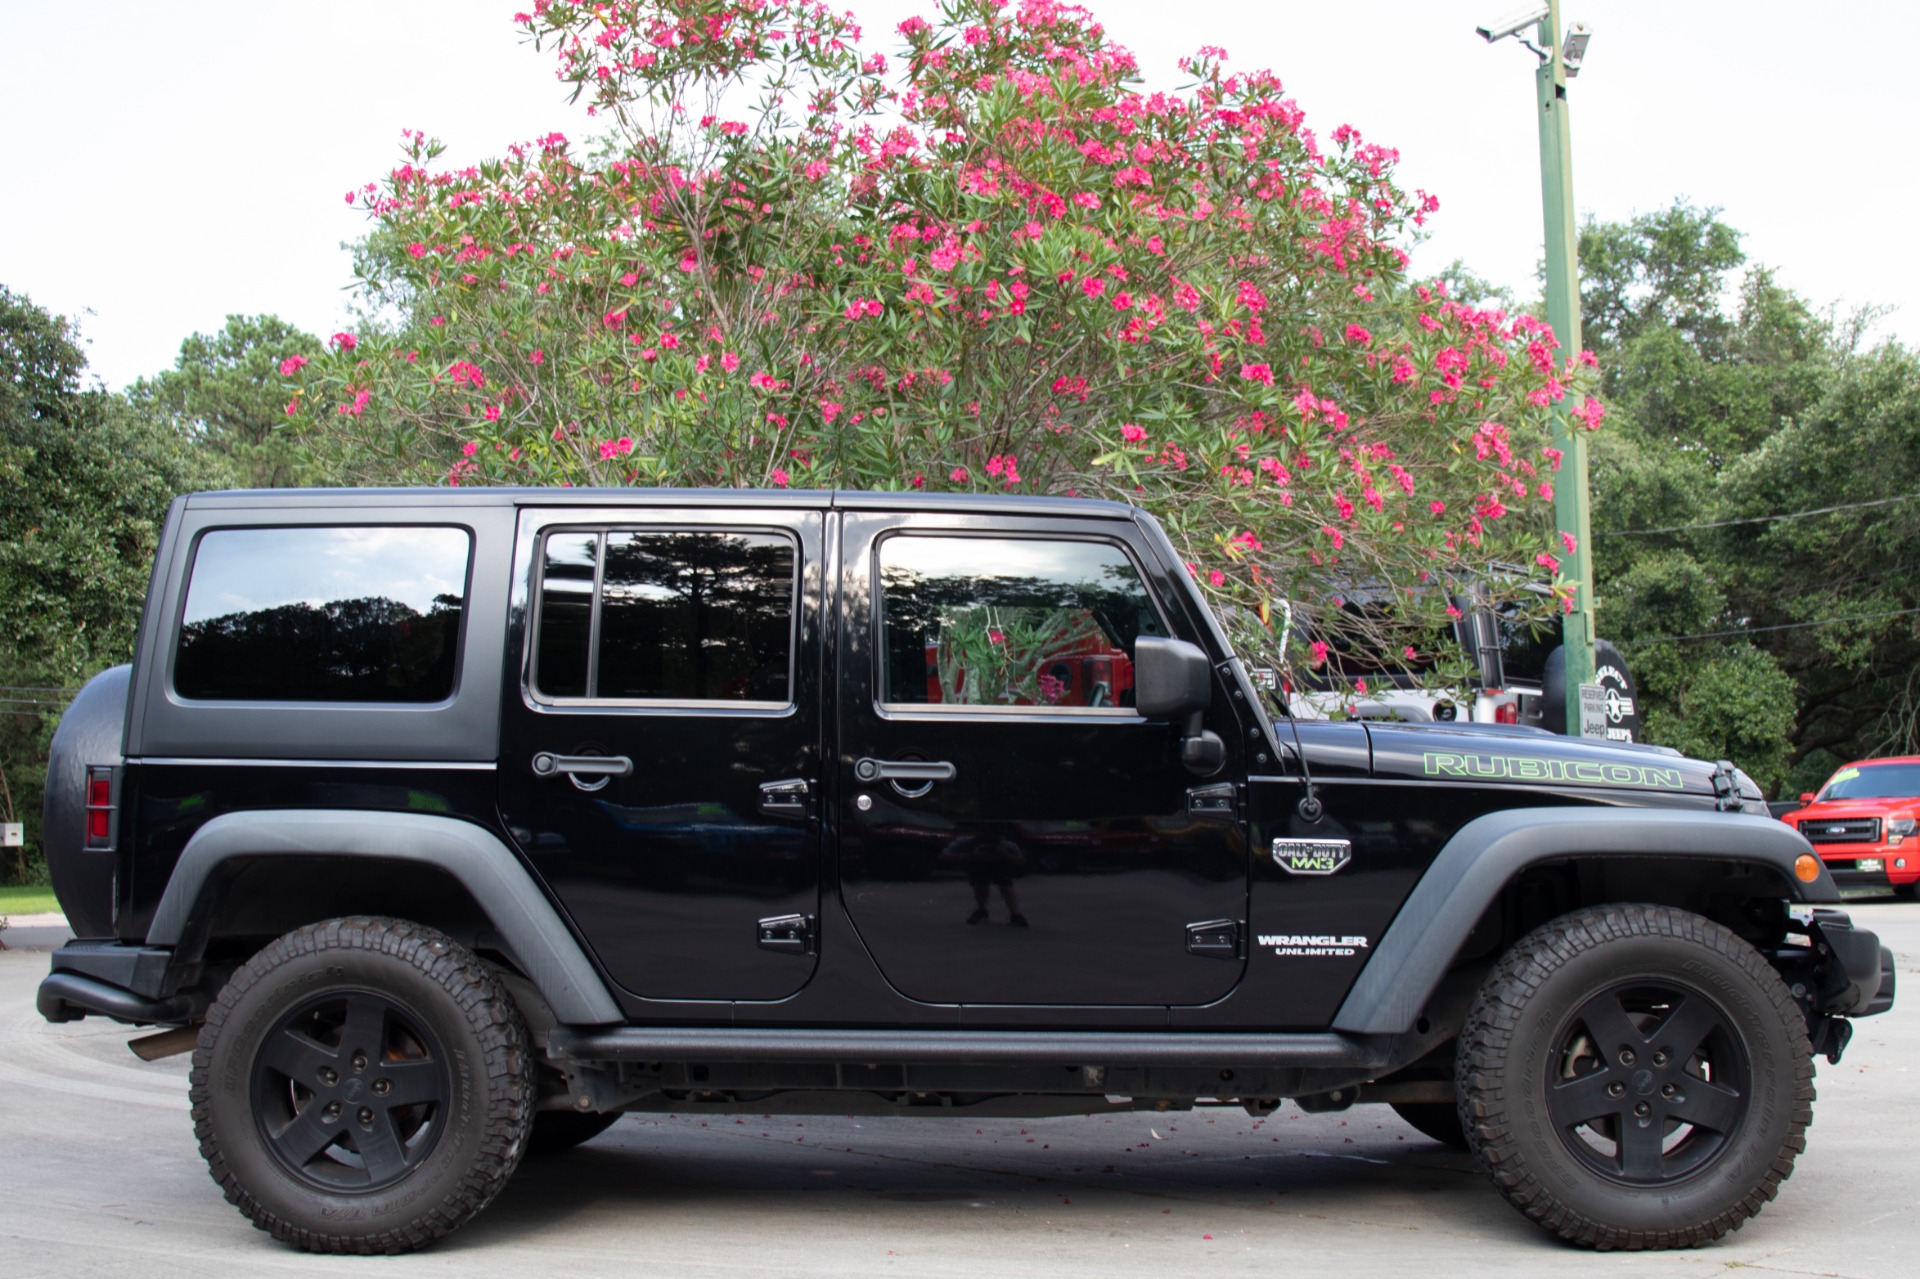 Used-2012-Jeep-Wrangler-Unlimited-Call-of-Duty-MW3